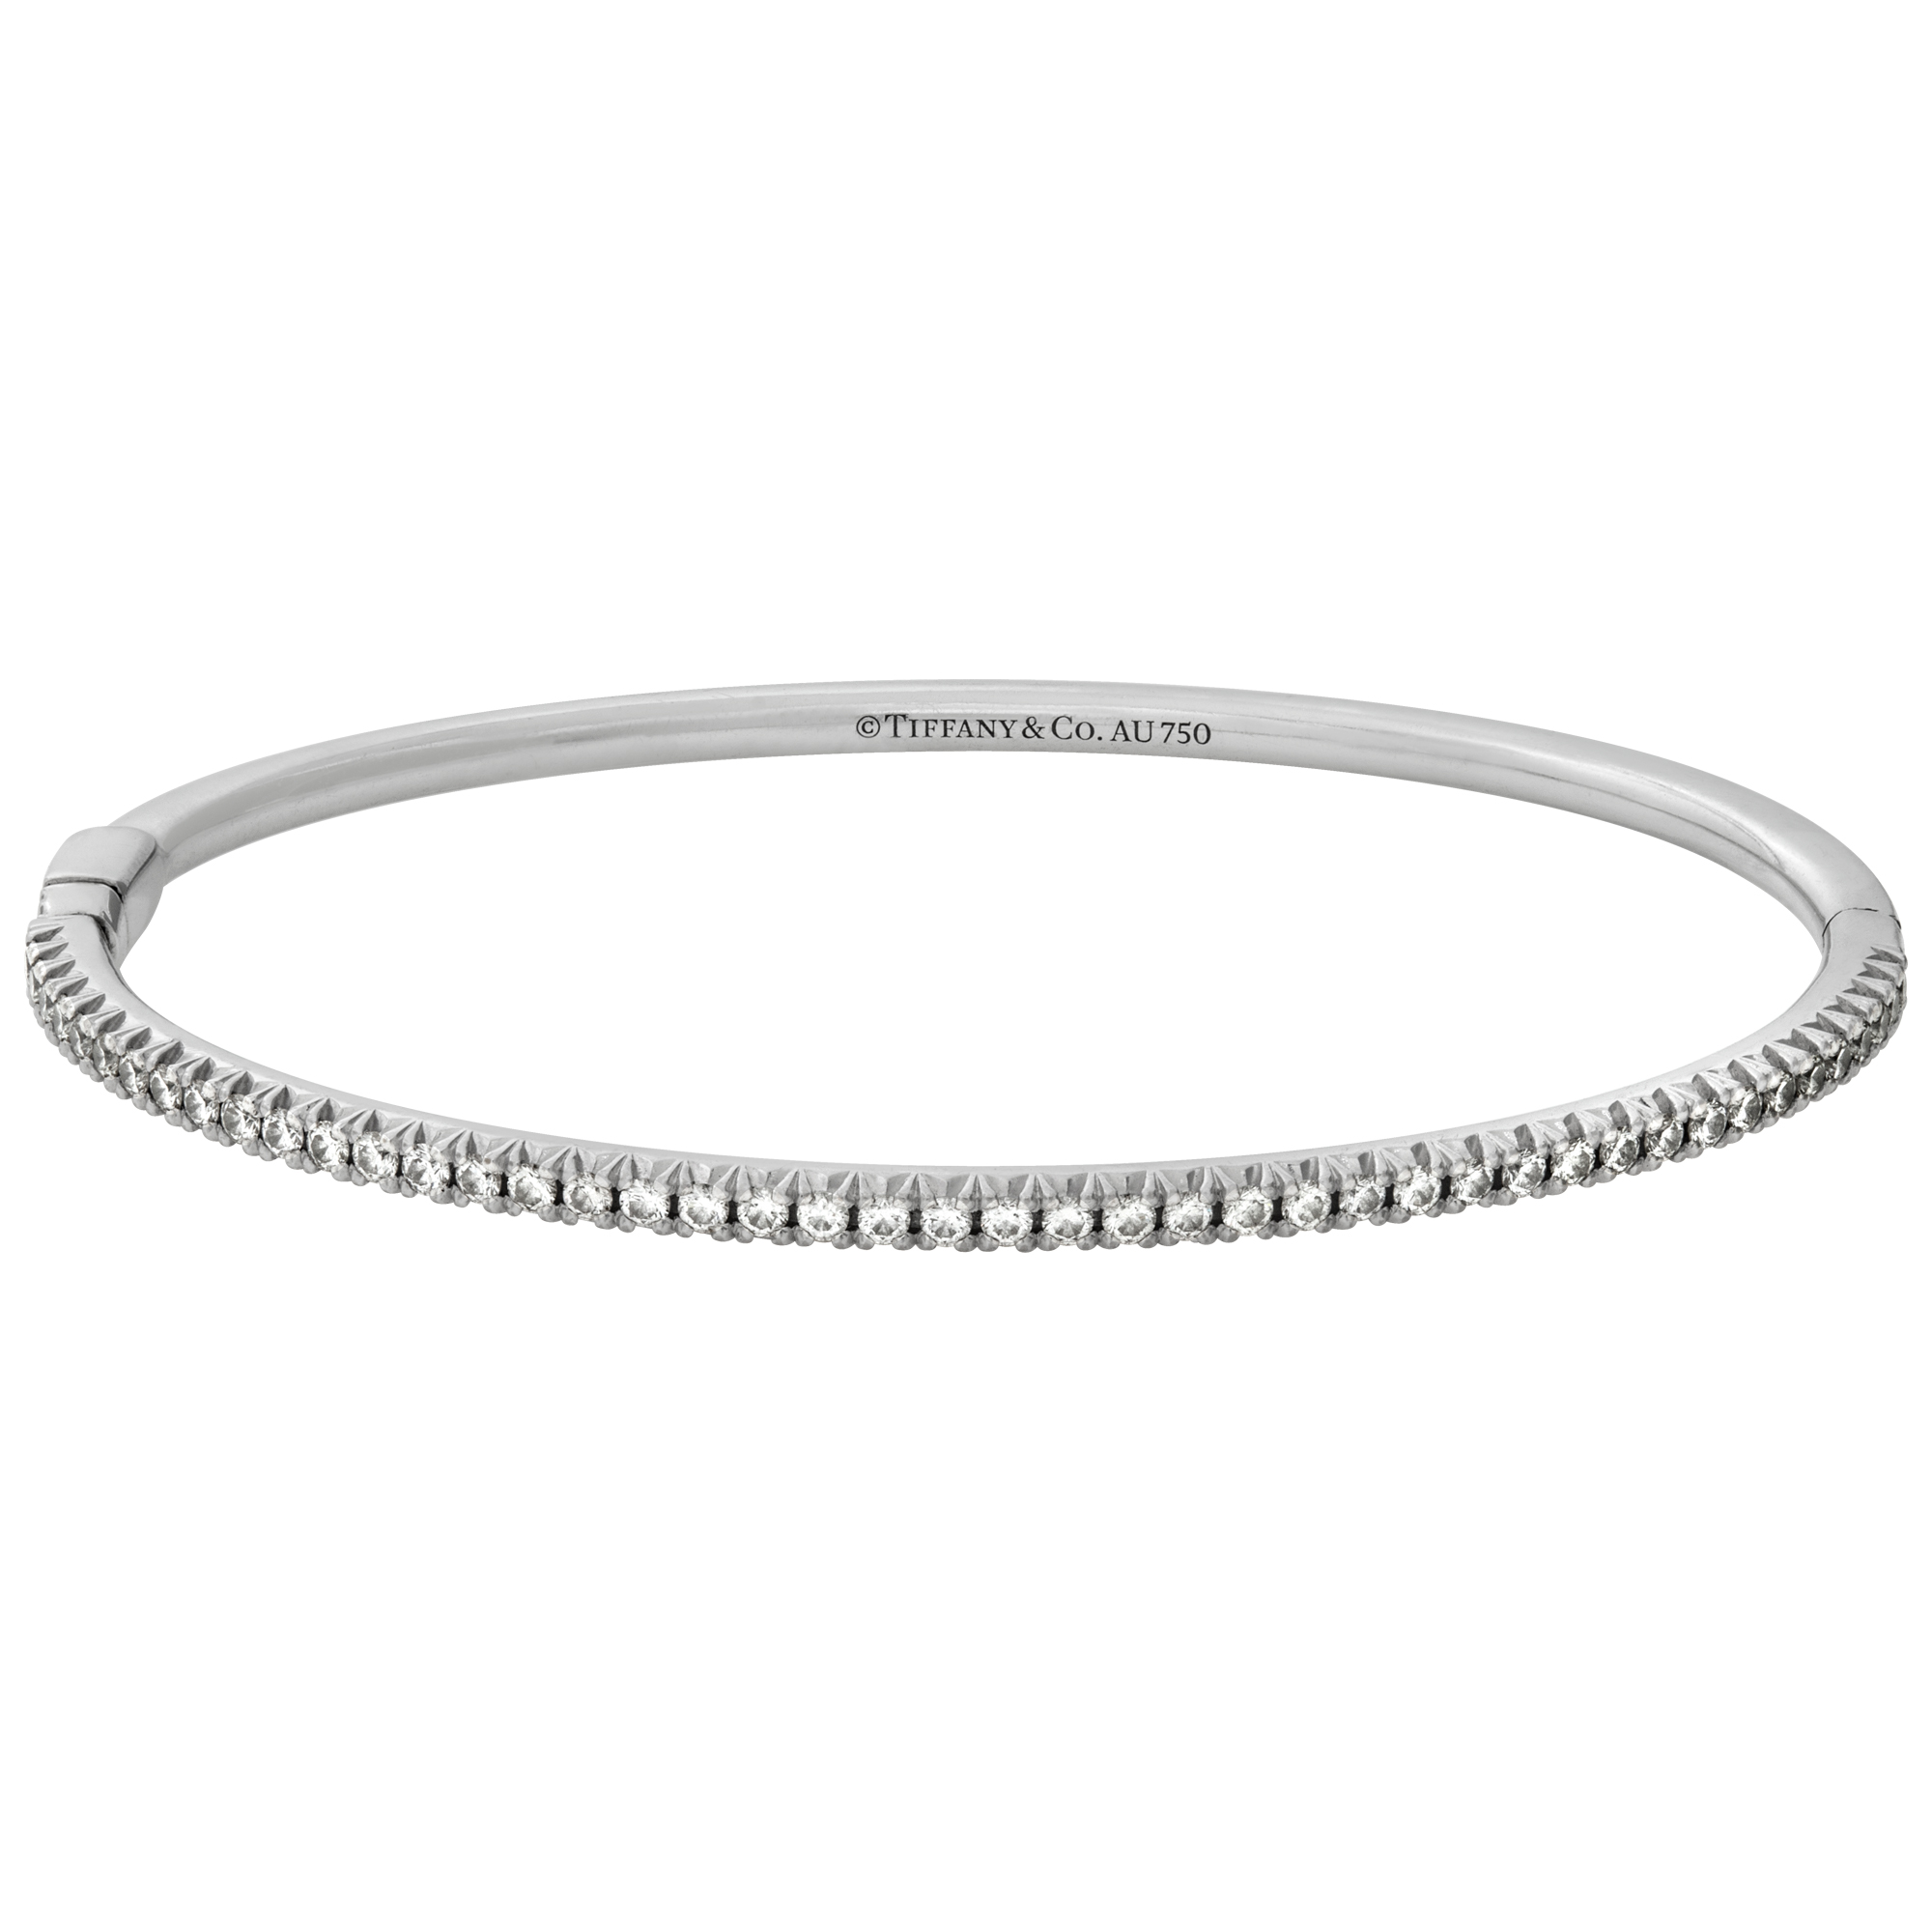 Tiffany & Co Metro hinged bangle in 18k white gold with 0.73 carats in diamonds image 1